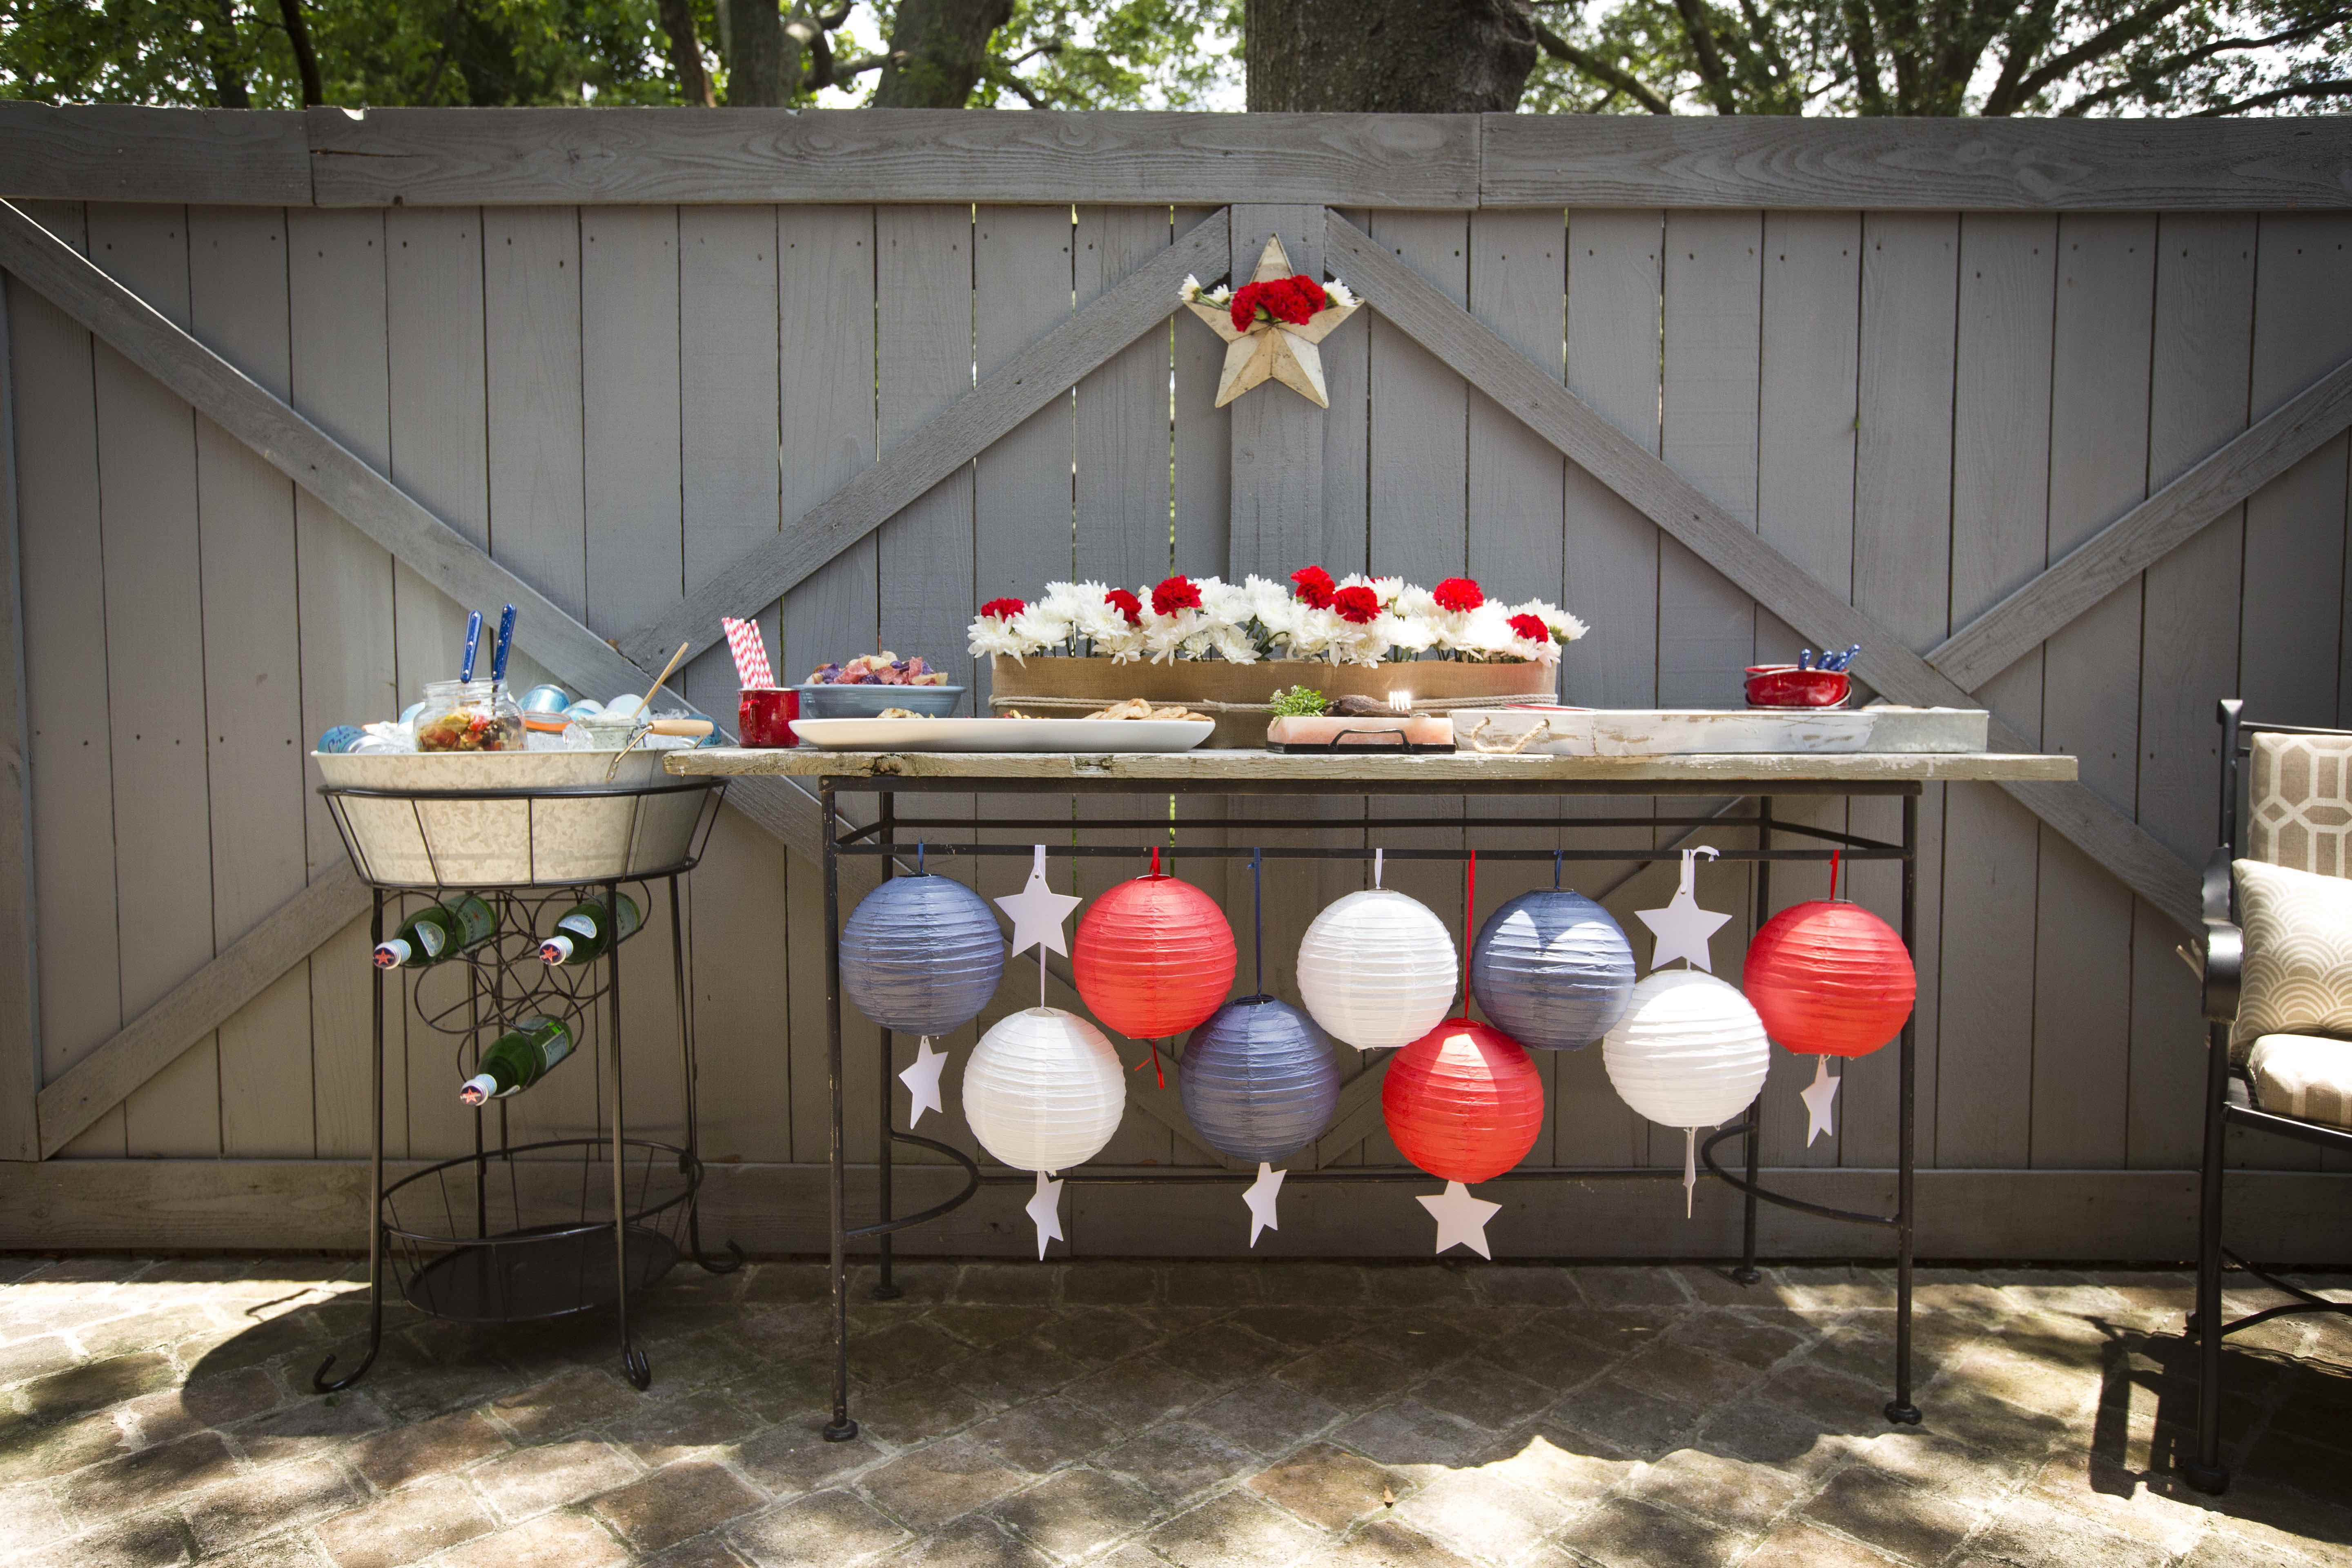 Host an Amazing Pre-Fireworks Get Together in the Backyard